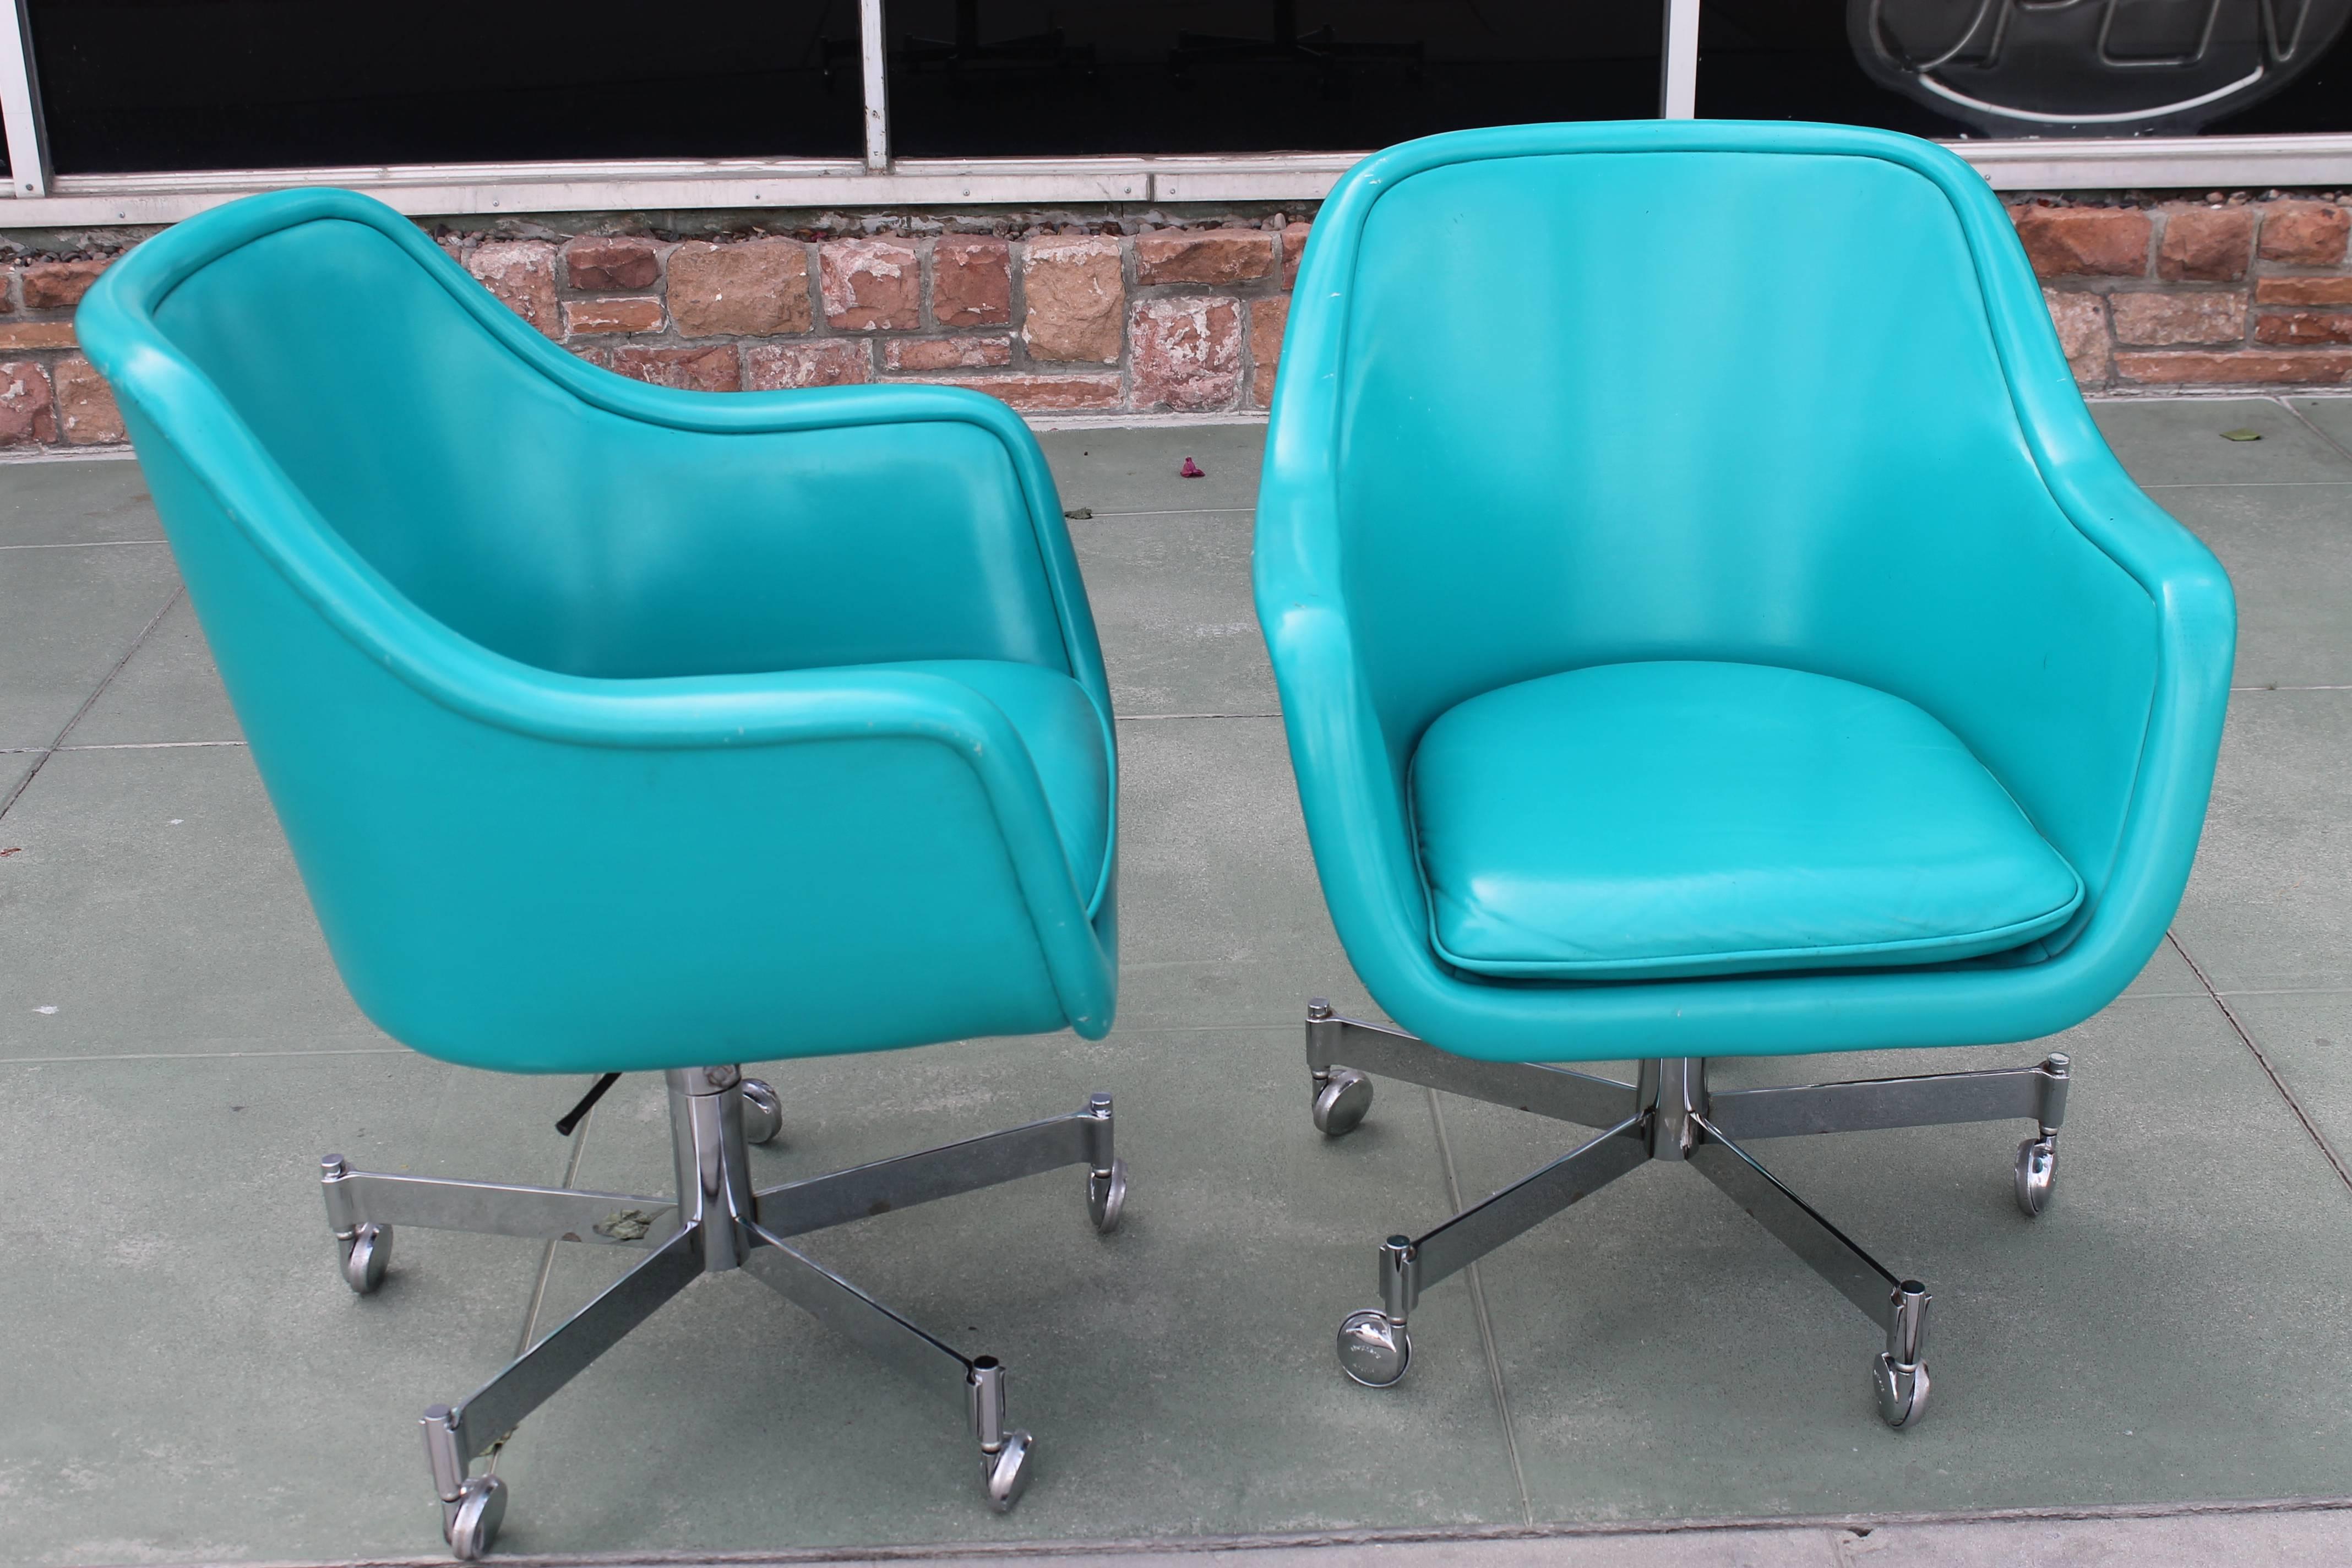 Pair of turquoise office chairs by Ward Bennett for Brickel Associates. Chairs tilt, swivel and are height adjustable. Both chairs show some wear. Extremely comfortable.